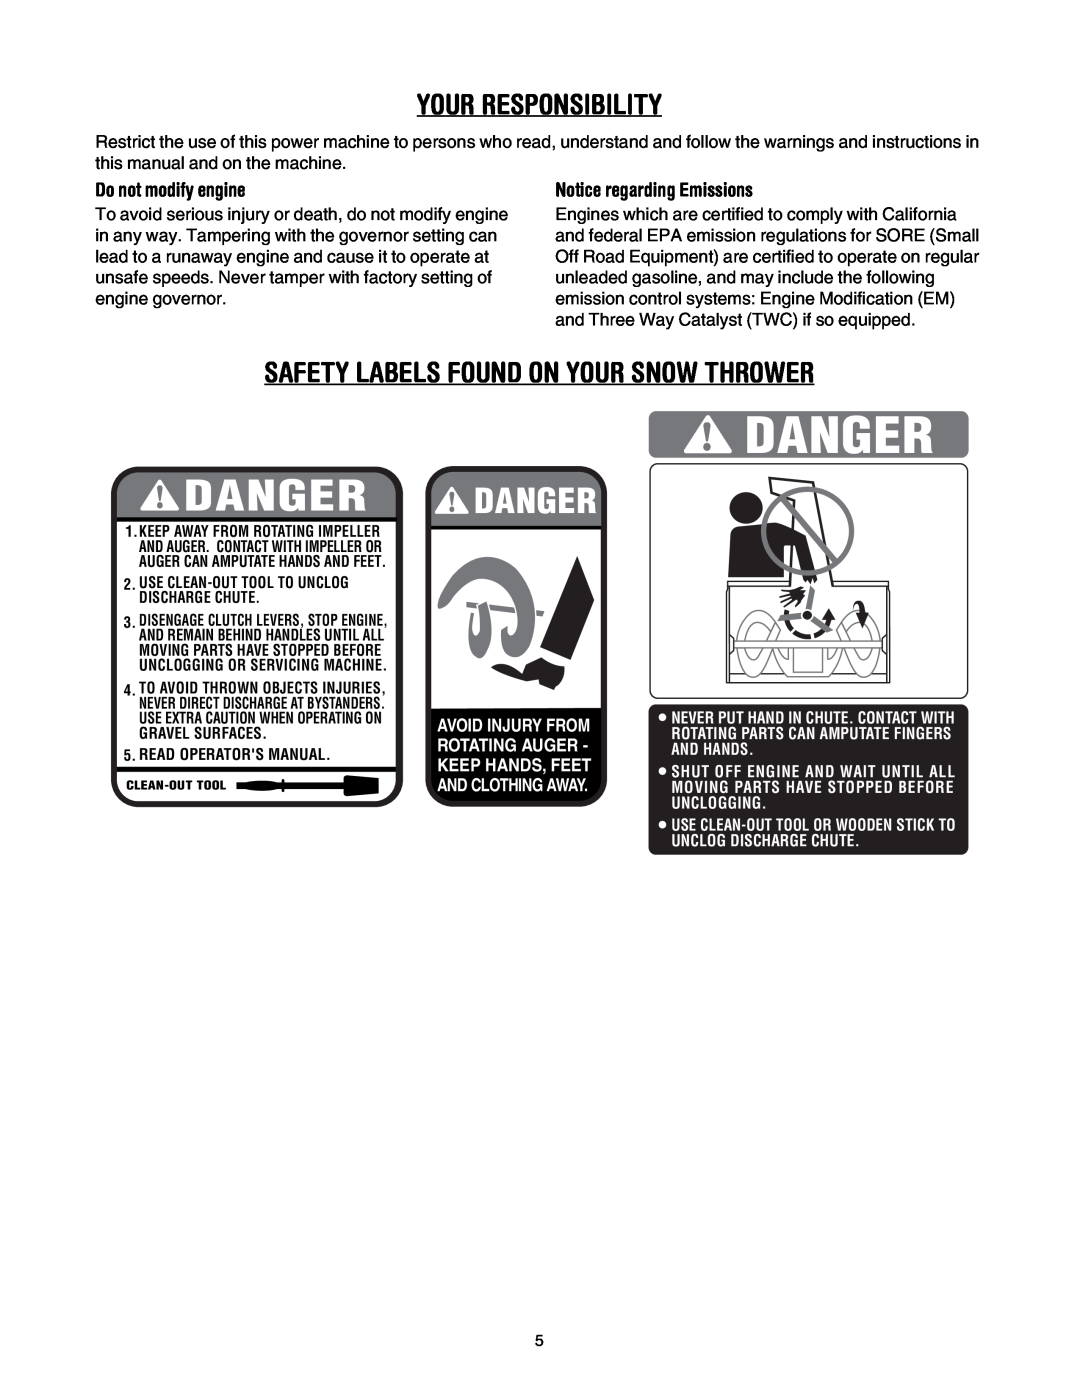 MTD L-Style manual Your Responsibility, Safety Labels Found On Your Snow Thrower, Do not modify engine, Danger 